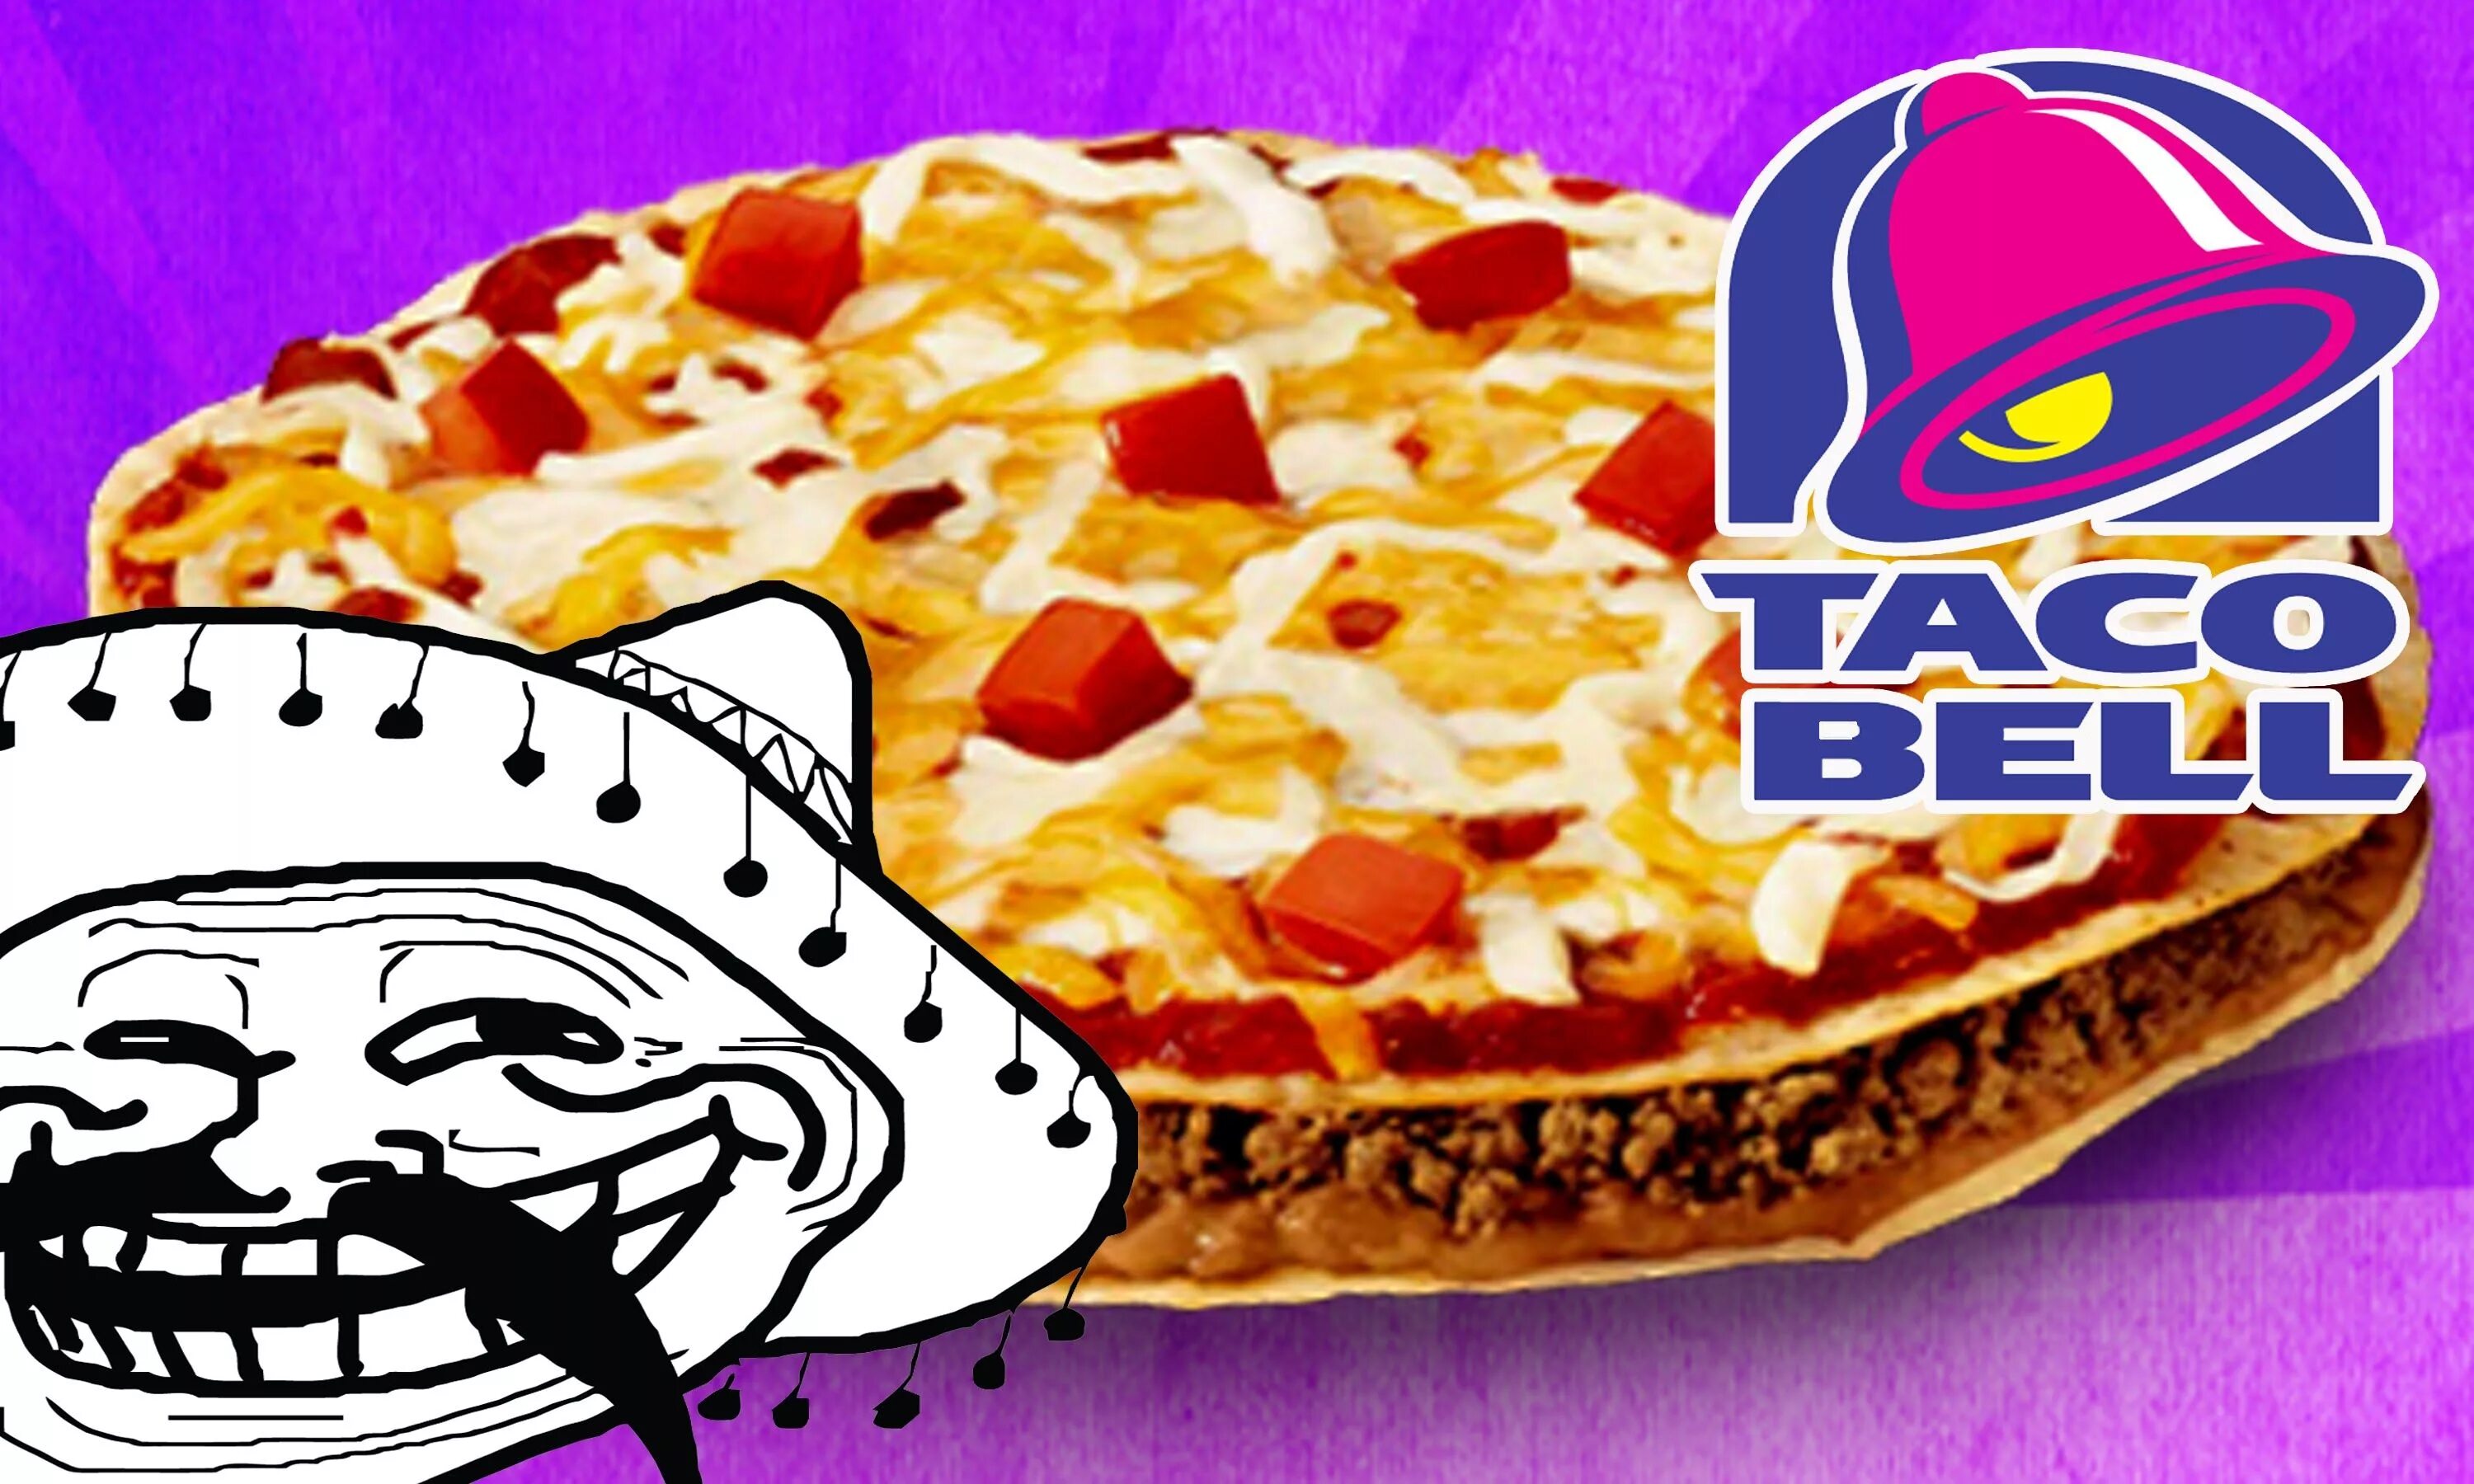 Тако пицца. Пицца тако Белл. Taco Bell Mexican pizza. Реклама Taco Bell Tacos.